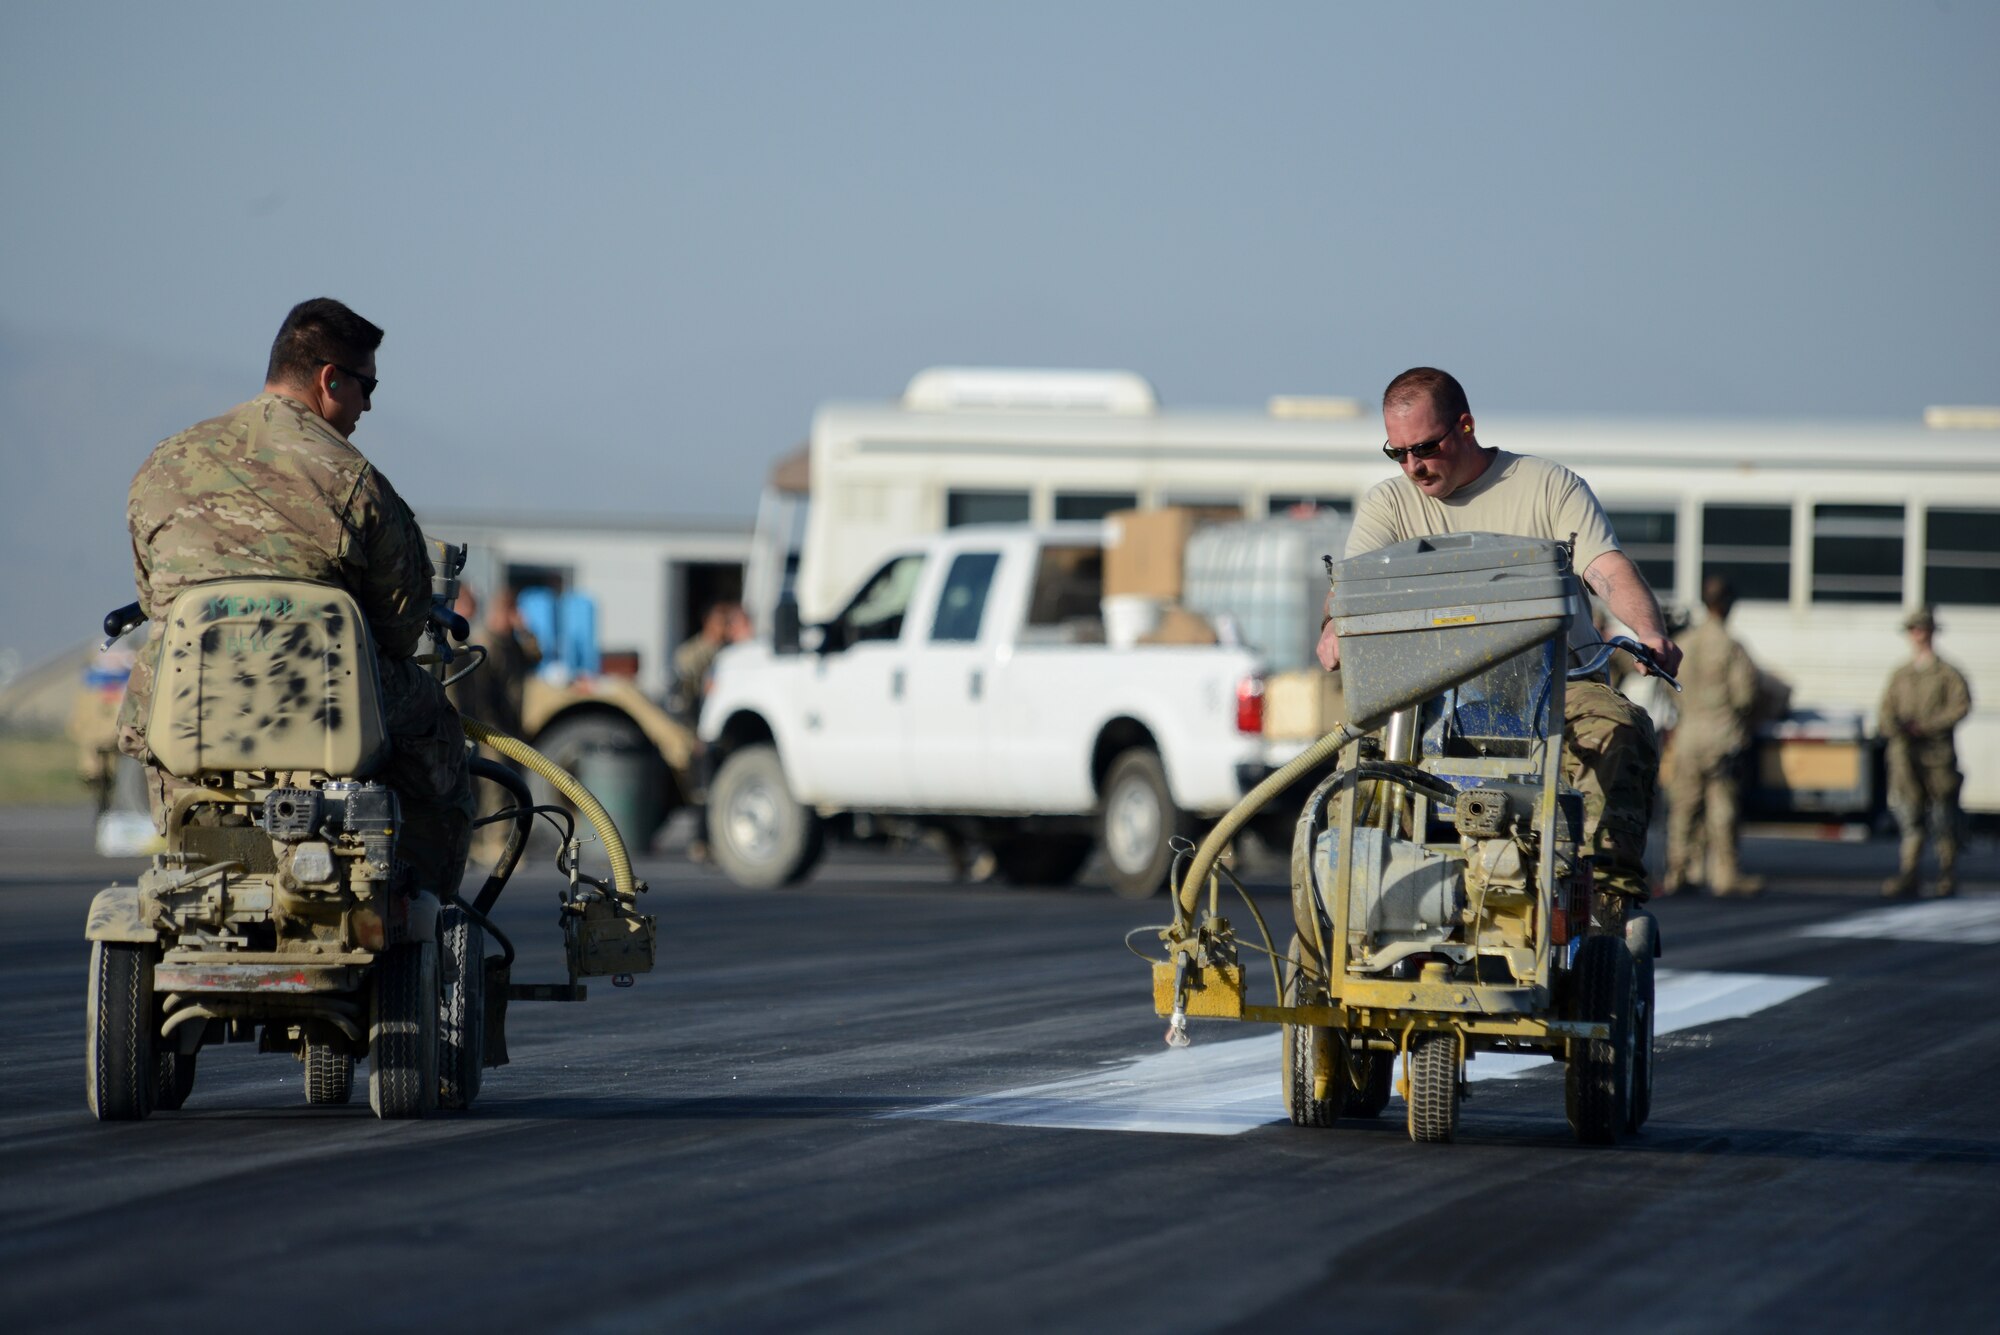 U.S. Air Force Airmen with the 455th Expeditionary Civil Engineer Squadron, paint the flightline at Bagram Airfield, Afghanistan June 8, 2014. The 455 ECES ensures operability of the airfield by providing airfield maintenance, construction and operation for the senior airfield authority mission. (U.S. Air Force photo by Master Sgt. Cohen A. Young/Released)